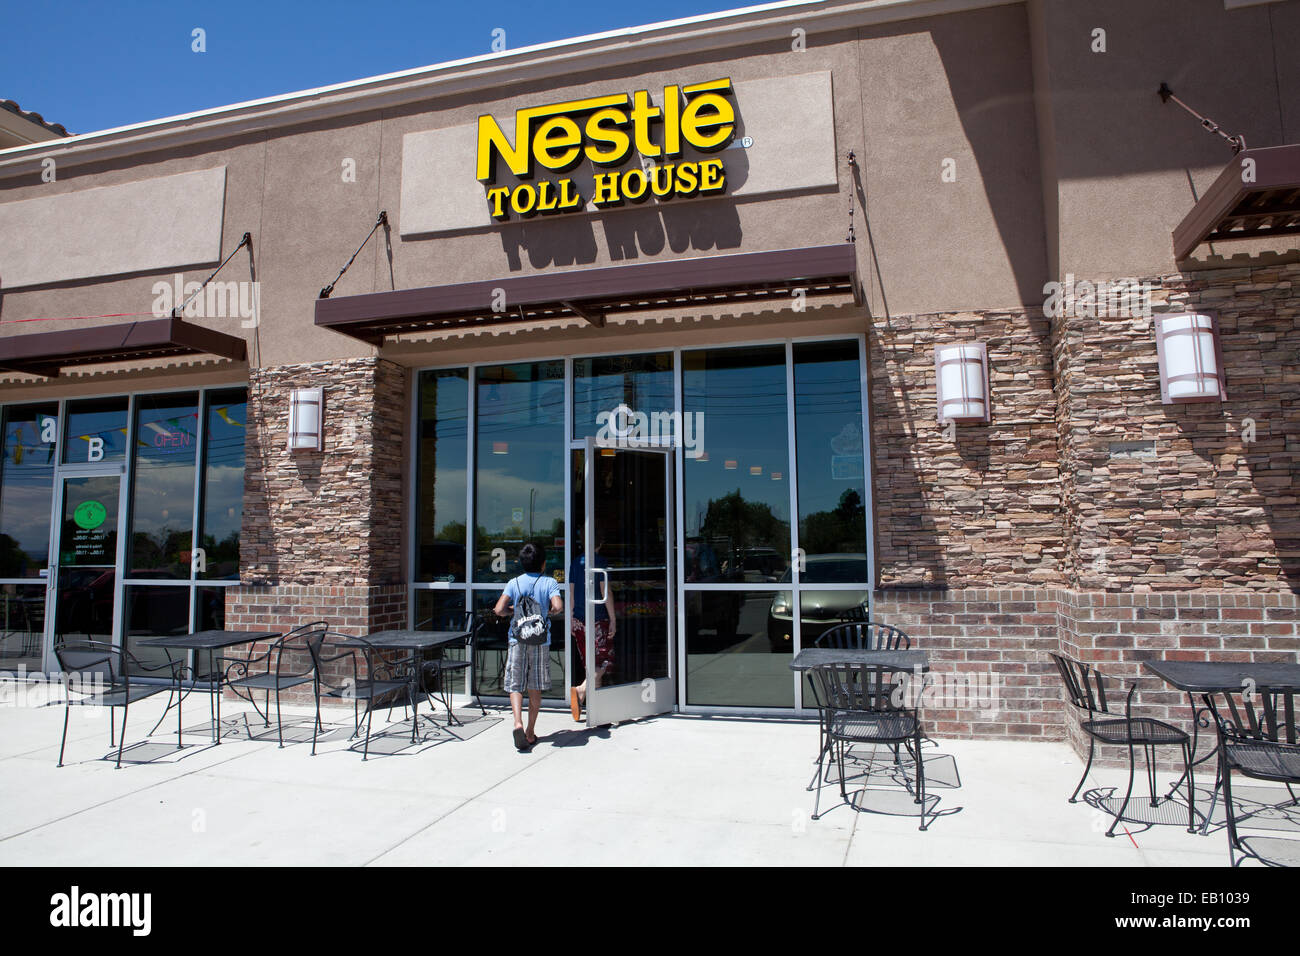 Nestle Toll House cookie and ice cream shop, New Mexico, USA Stock Photo